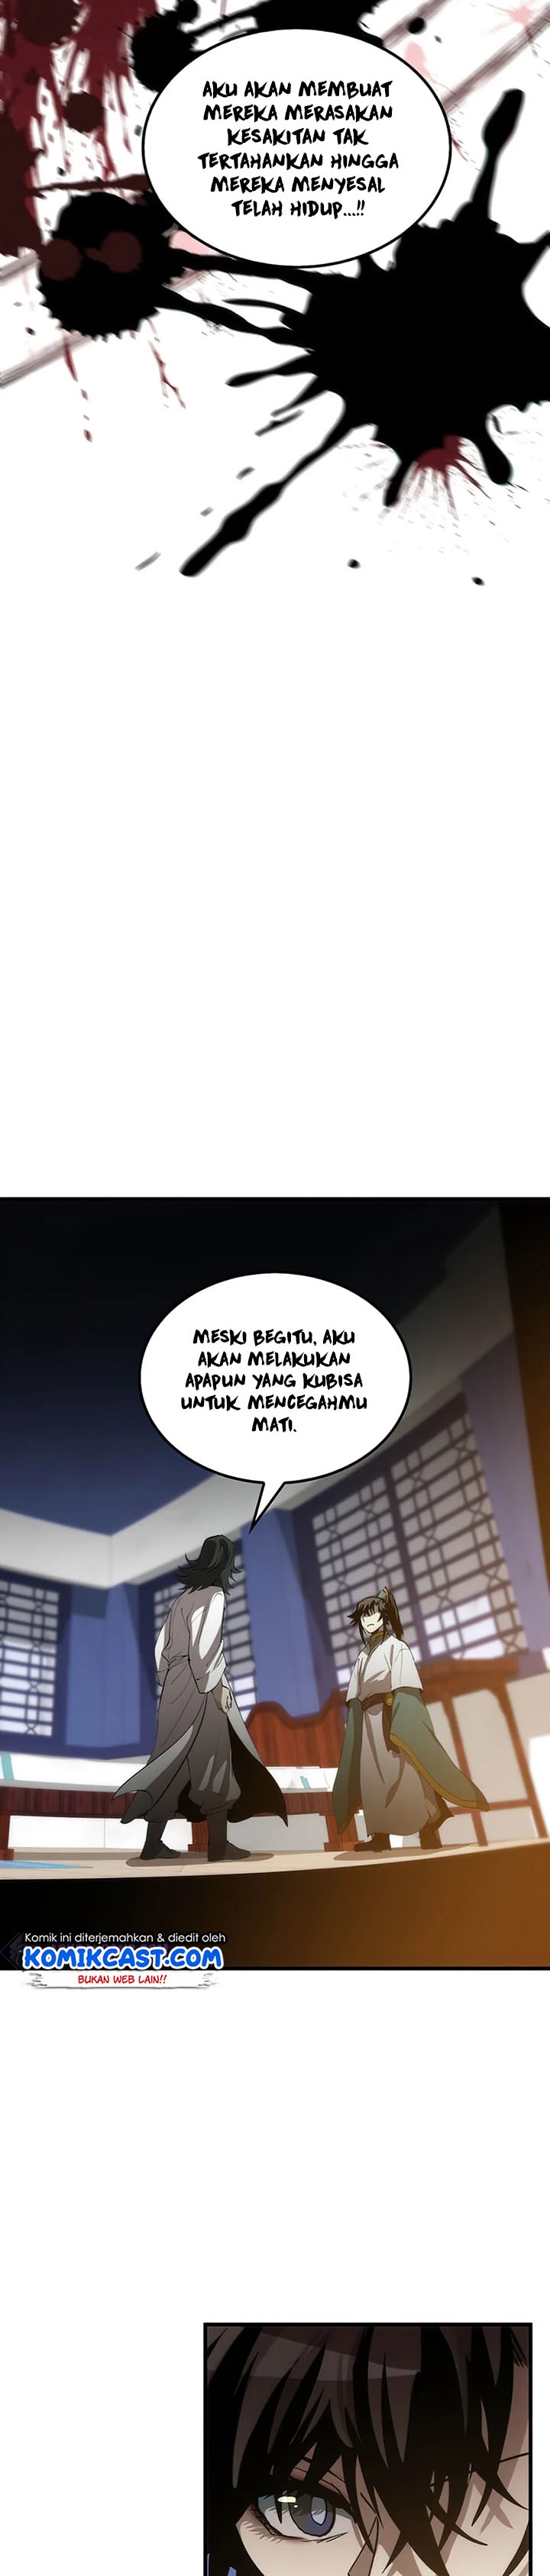 Doctor’s Rebirth Chapter 74